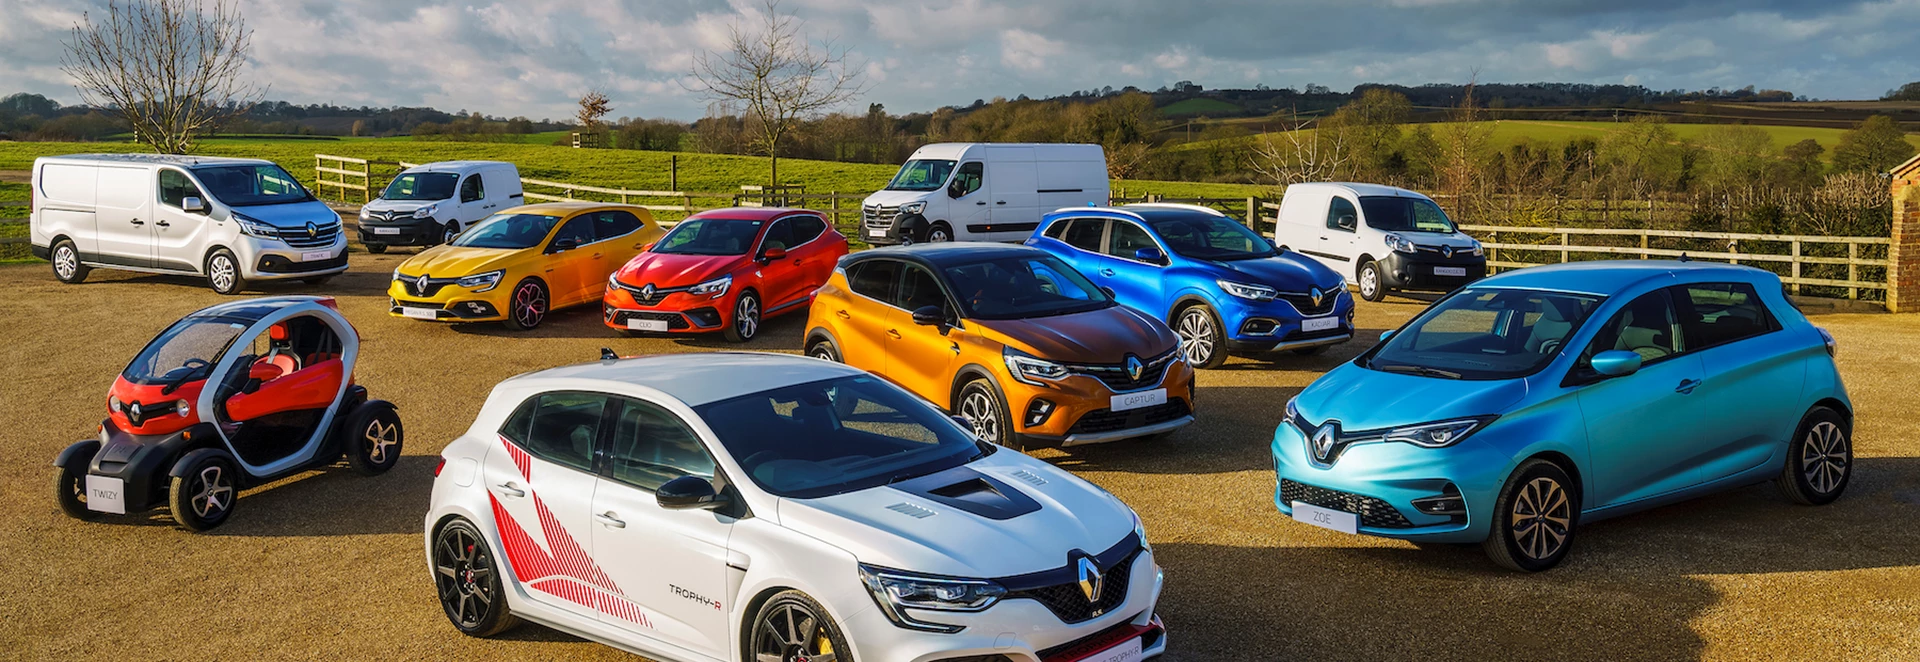 Renault announces new online reservation tool 